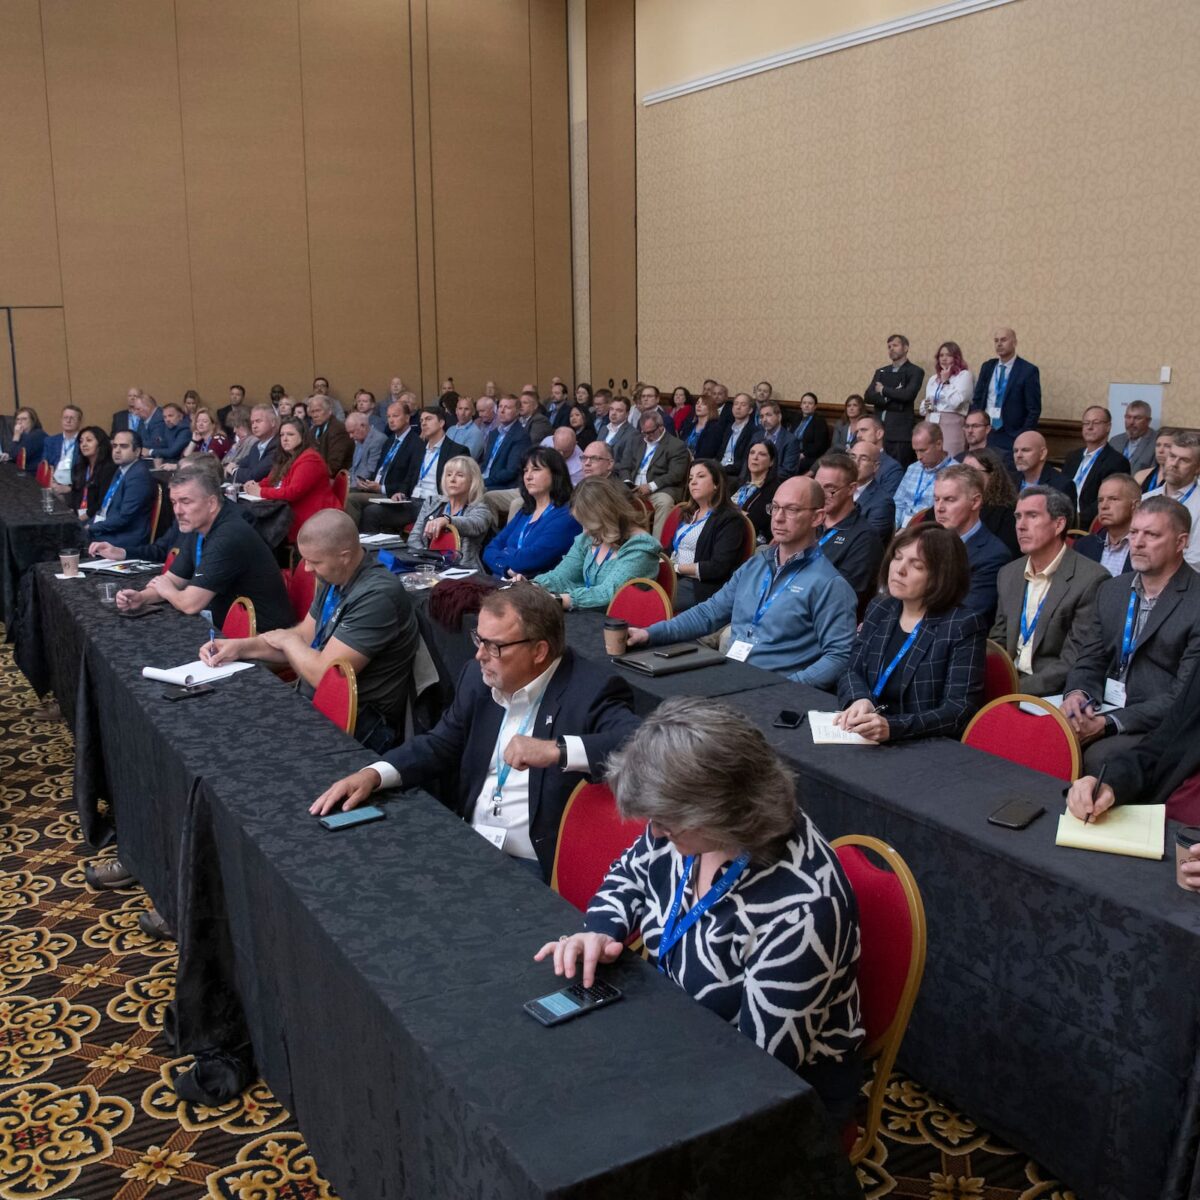 acec members sitting while taking notes during a conference